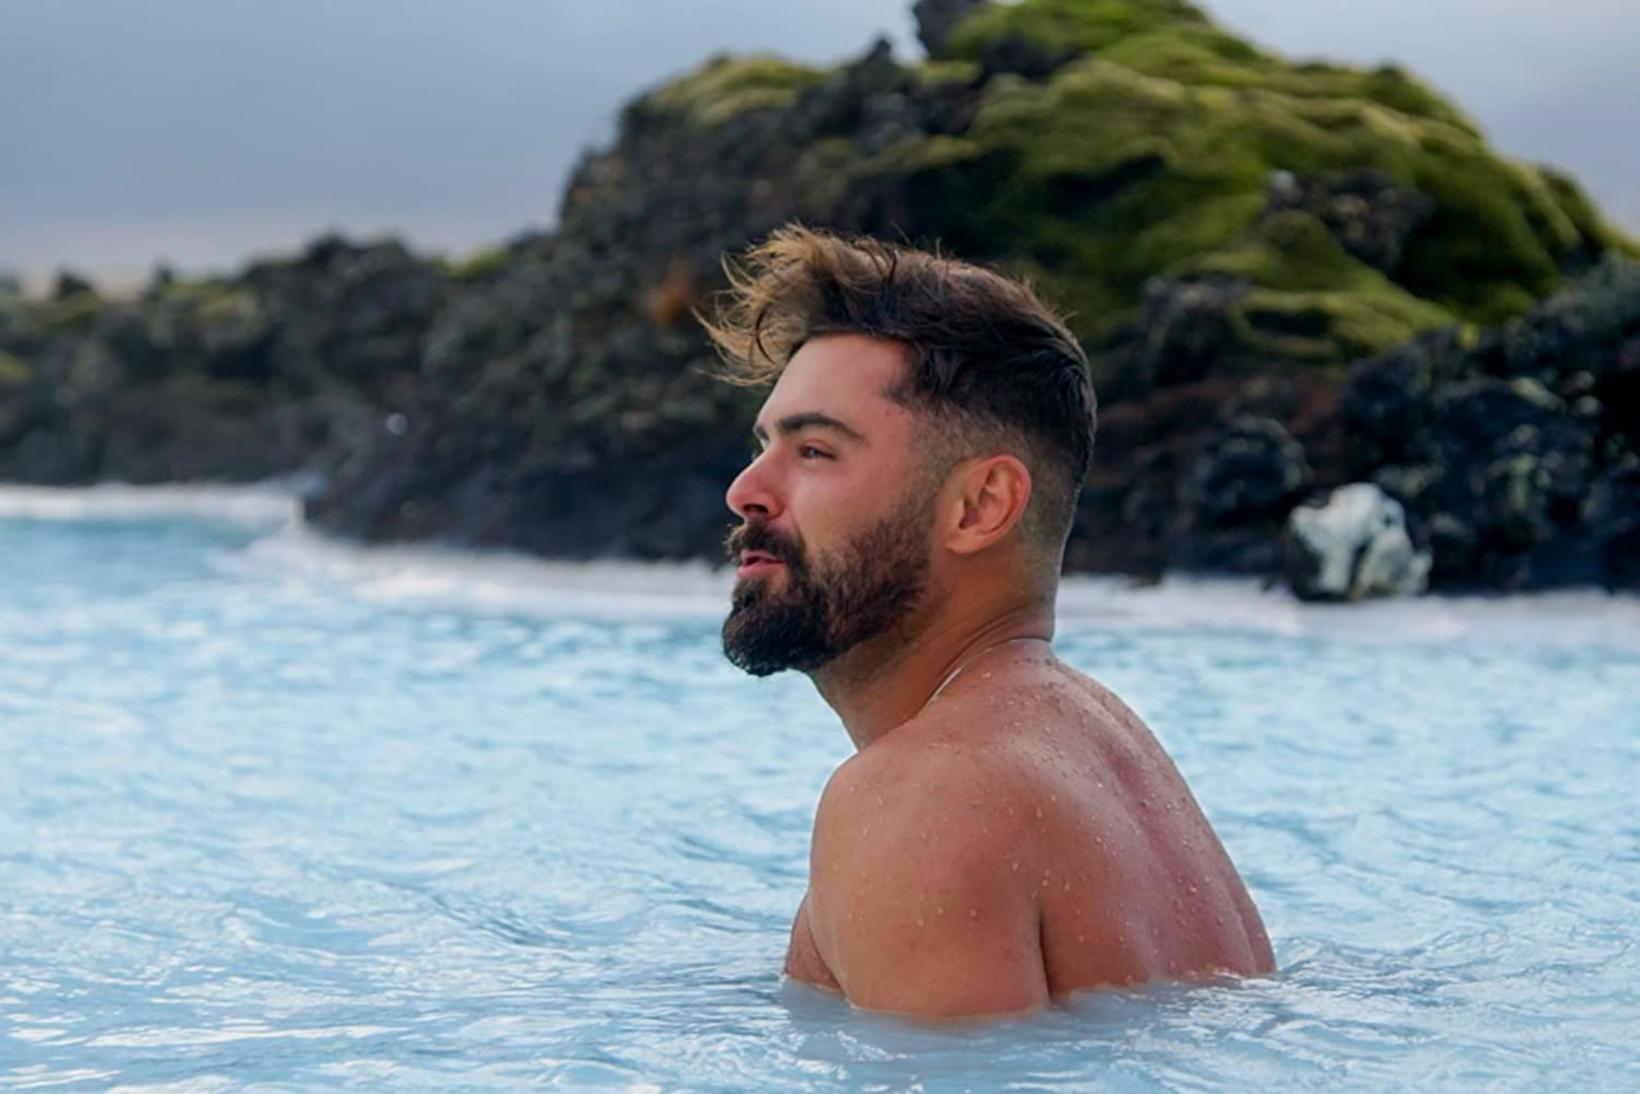 Down to earth with Zac Efron in Iceland